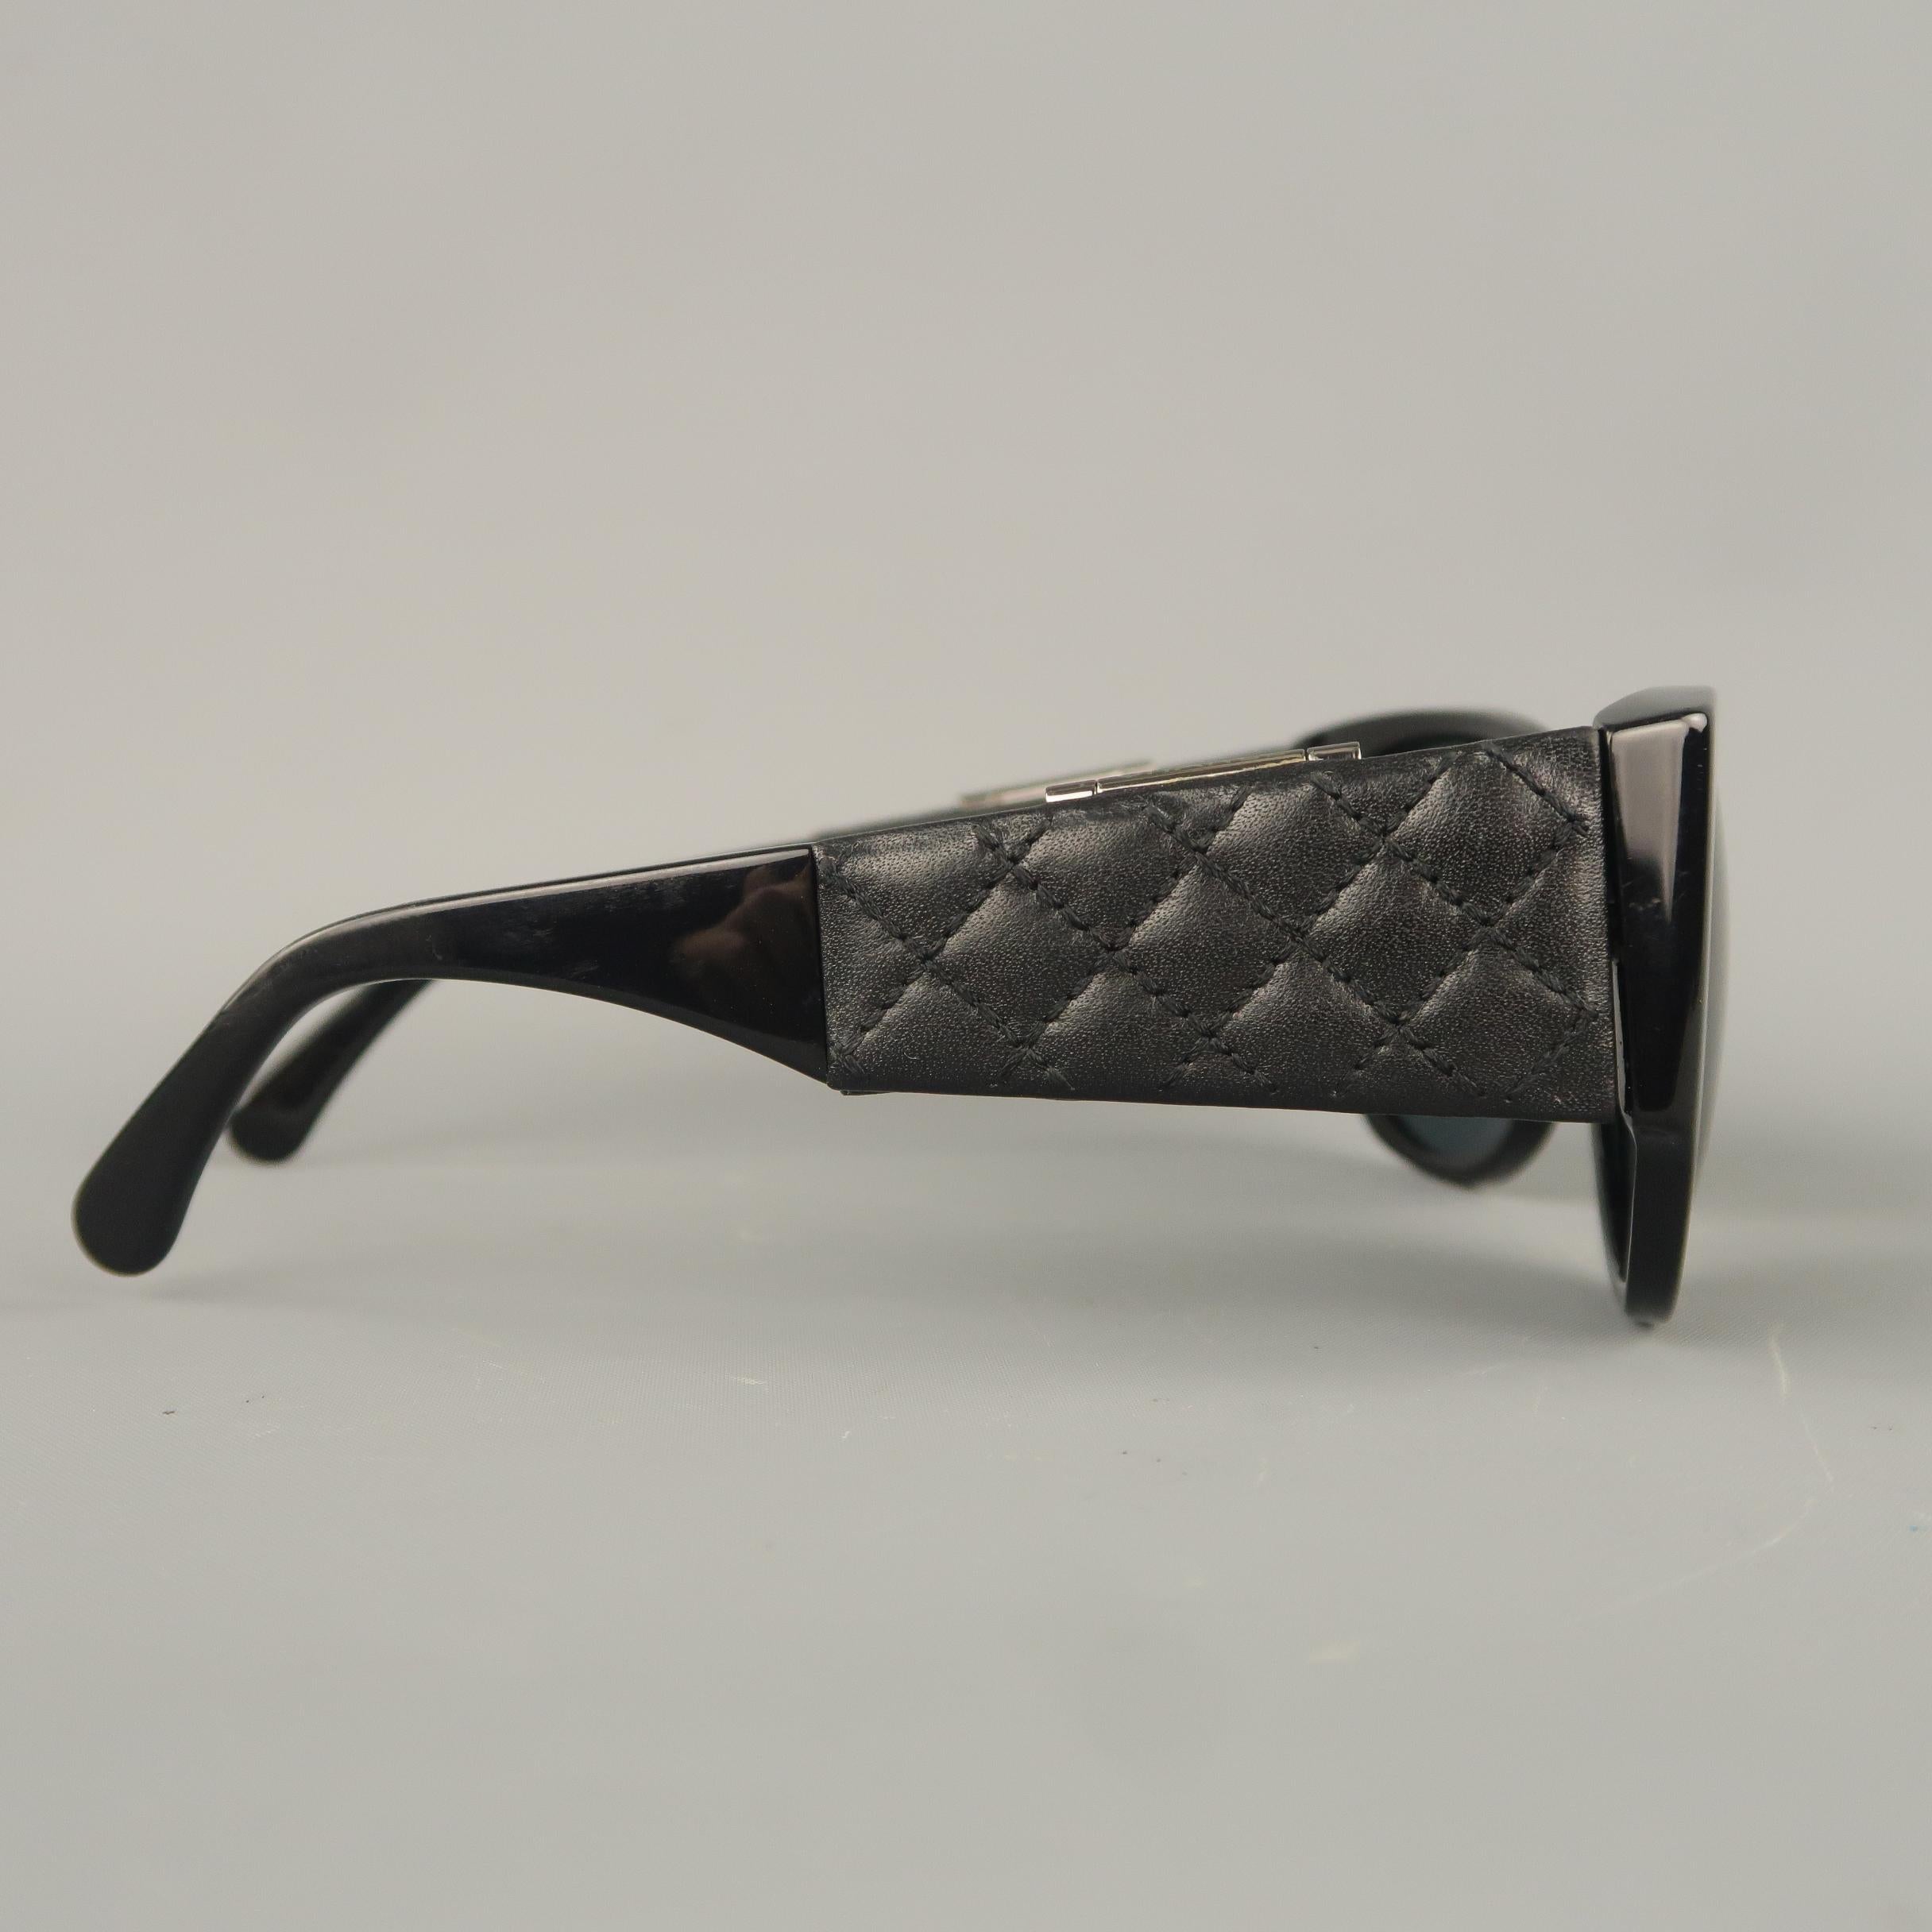  1990's CHANEL Black Quilted Leather Flip Up Mirror Arm 5202 Sunglasses 2